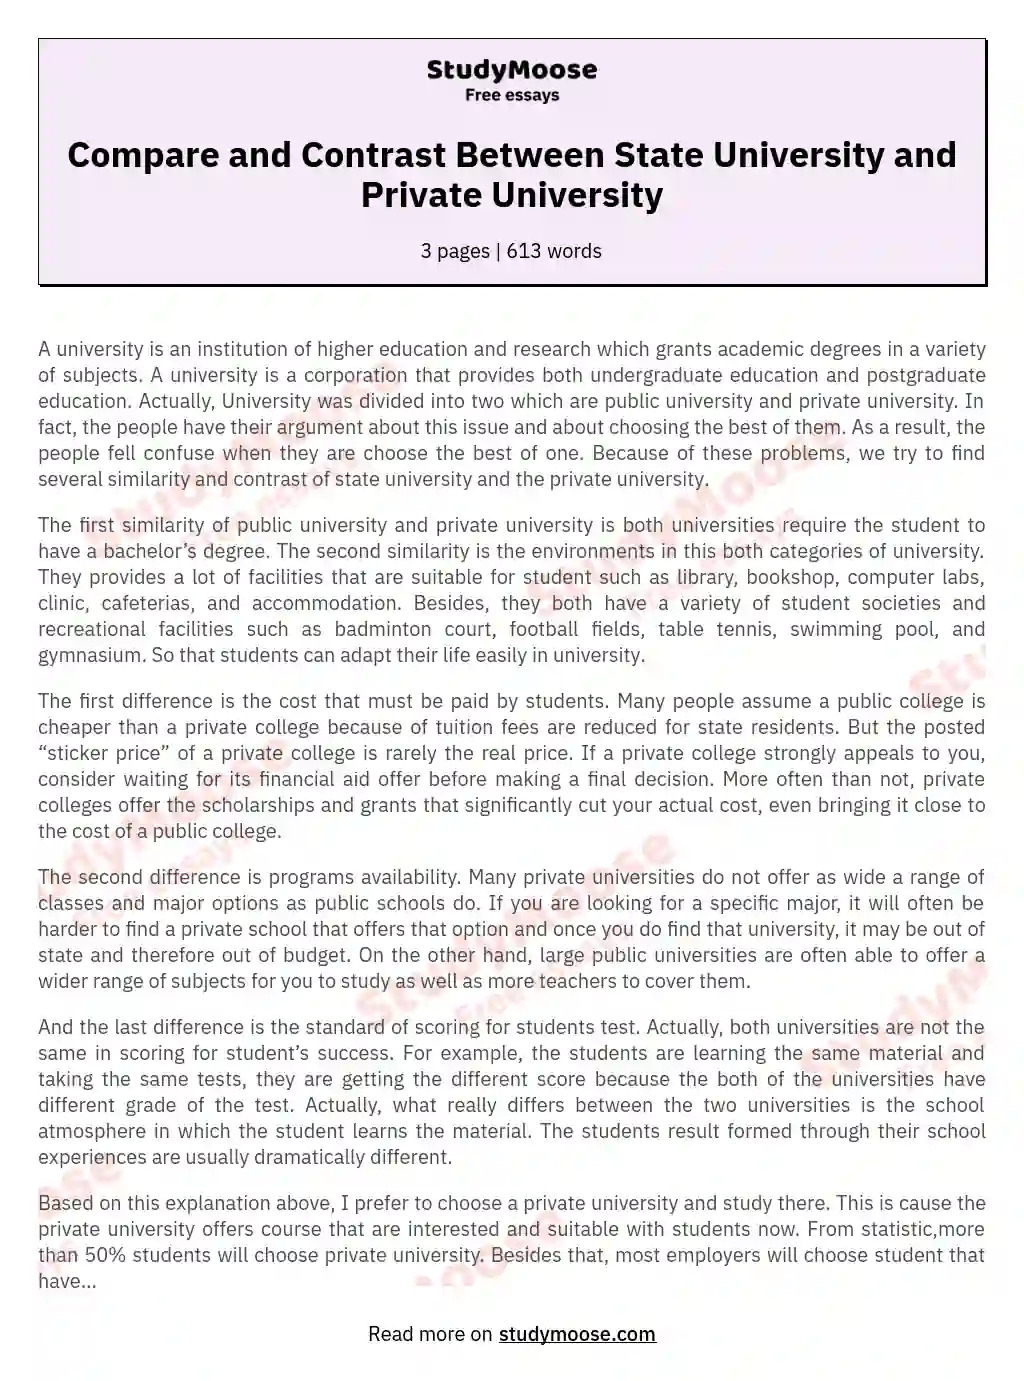 Compare and Contrast Between State University and Private University essay